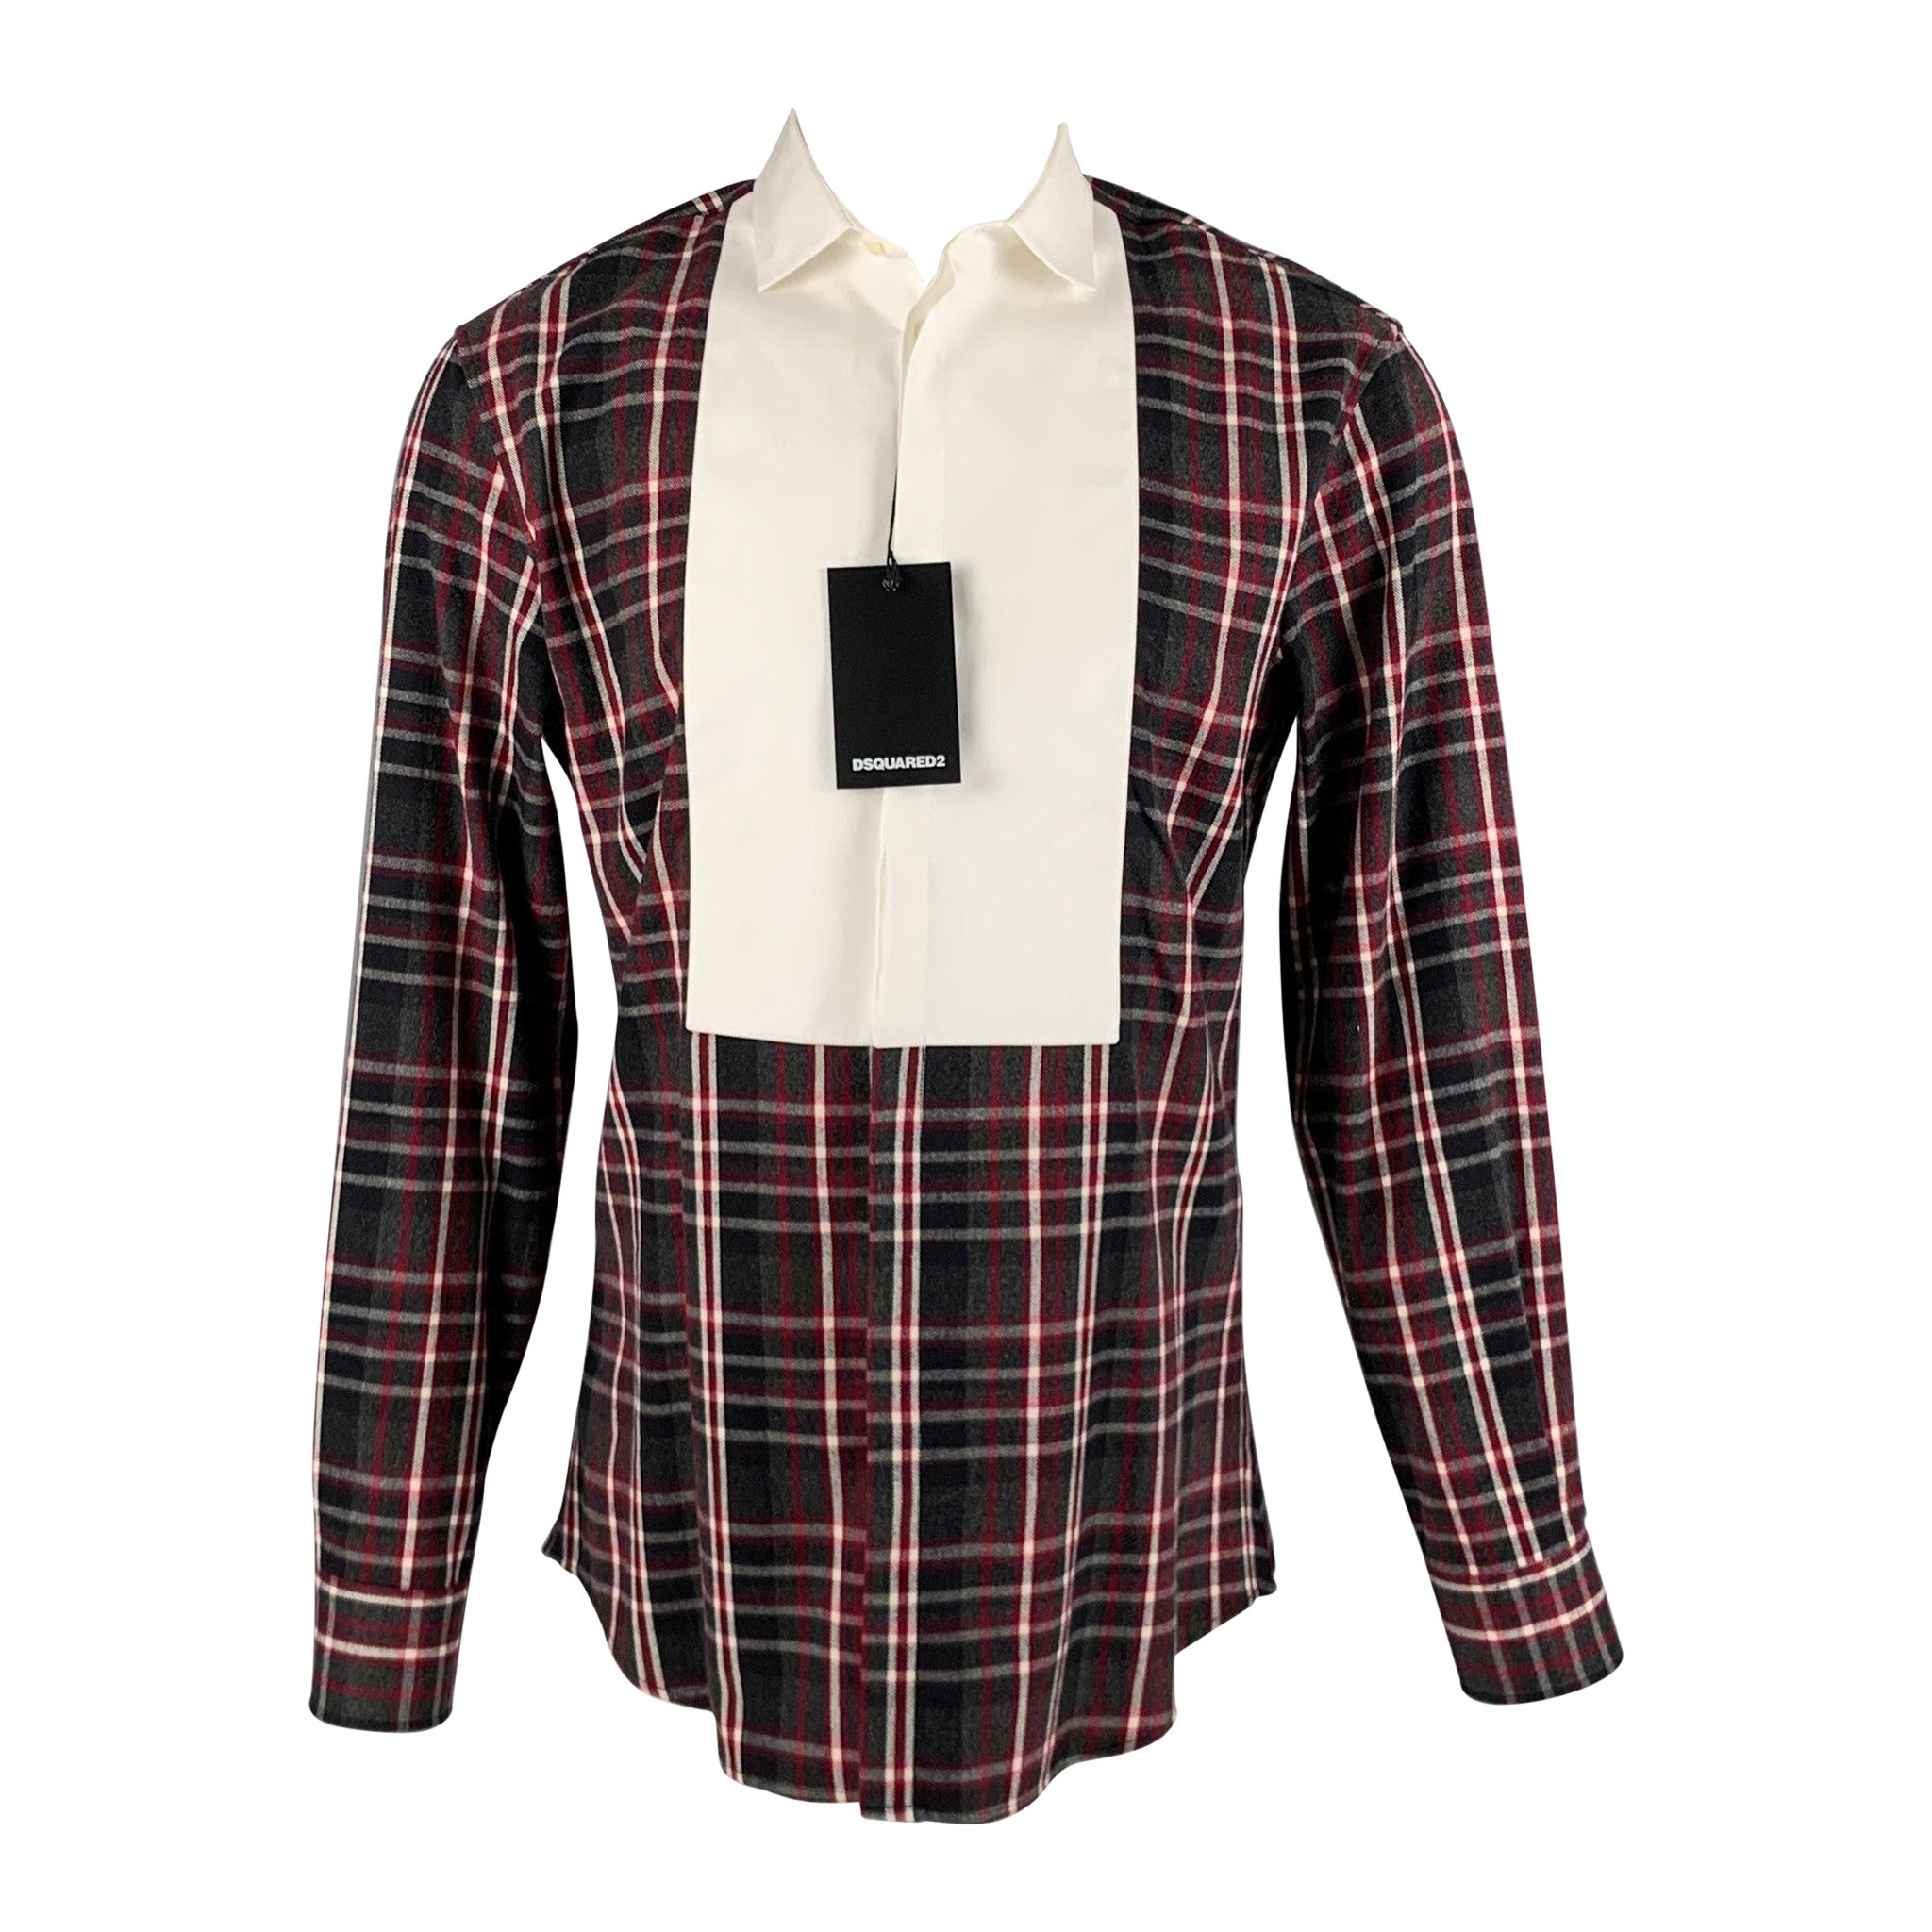 DSQUARED2 Size S Grey Black Red Plaid Cotton Tuxedo Long Sleeve Shirt For Sale